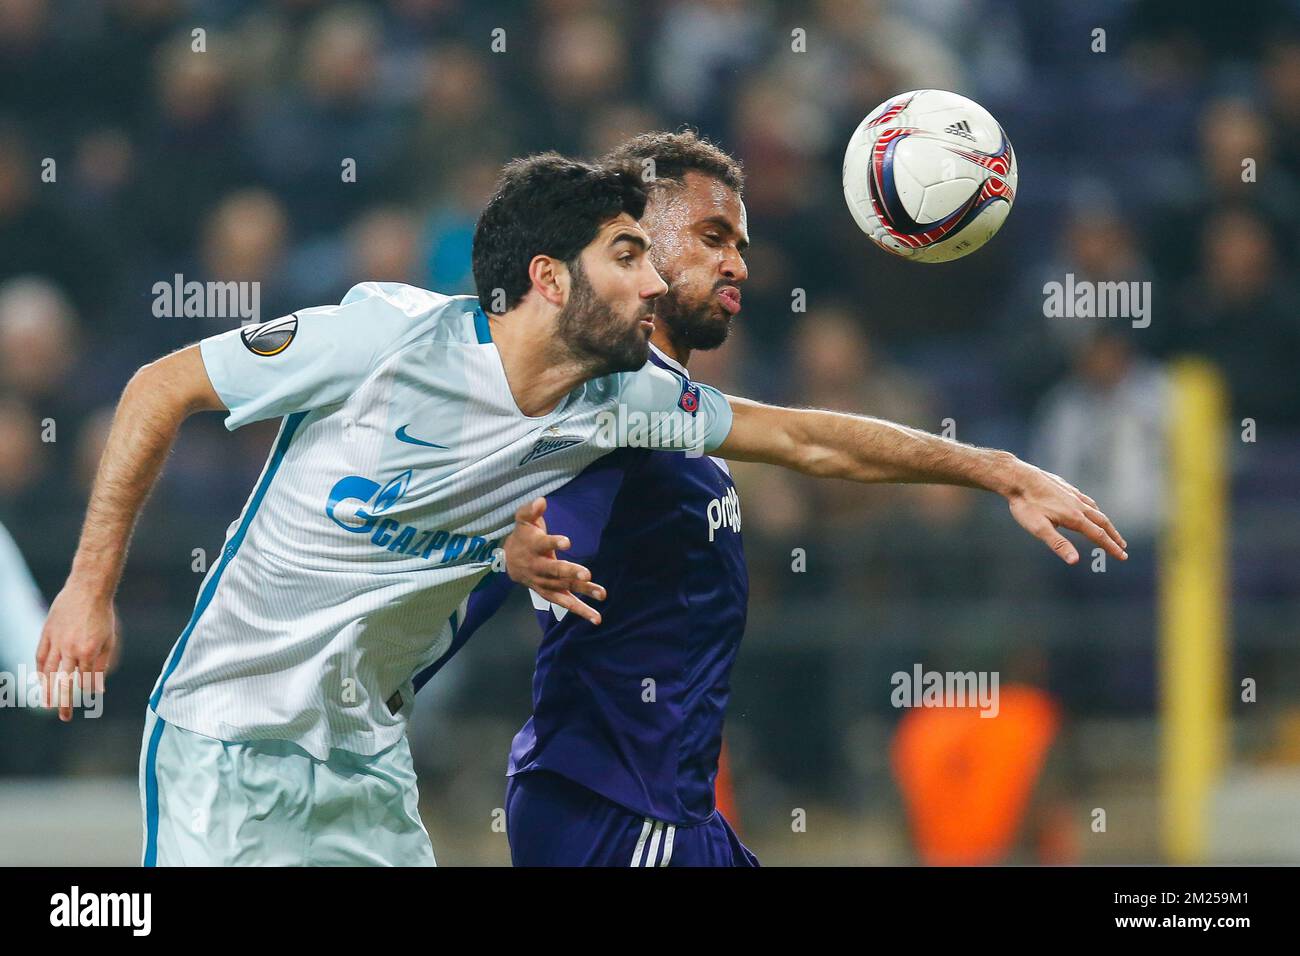 Zenit's defender Luis Neto and Anderlecht's Isaac Kiese Thelin fight for the ball during a game between Belgian soccer team RSC Anderlecht and Russian team FC Zenit, first-leg of the 1/16 finals of the Europa League competition, Thursday 16 February 2017, in Brussels. BELGA PHOTO BRUNO FAHY Stock Photo